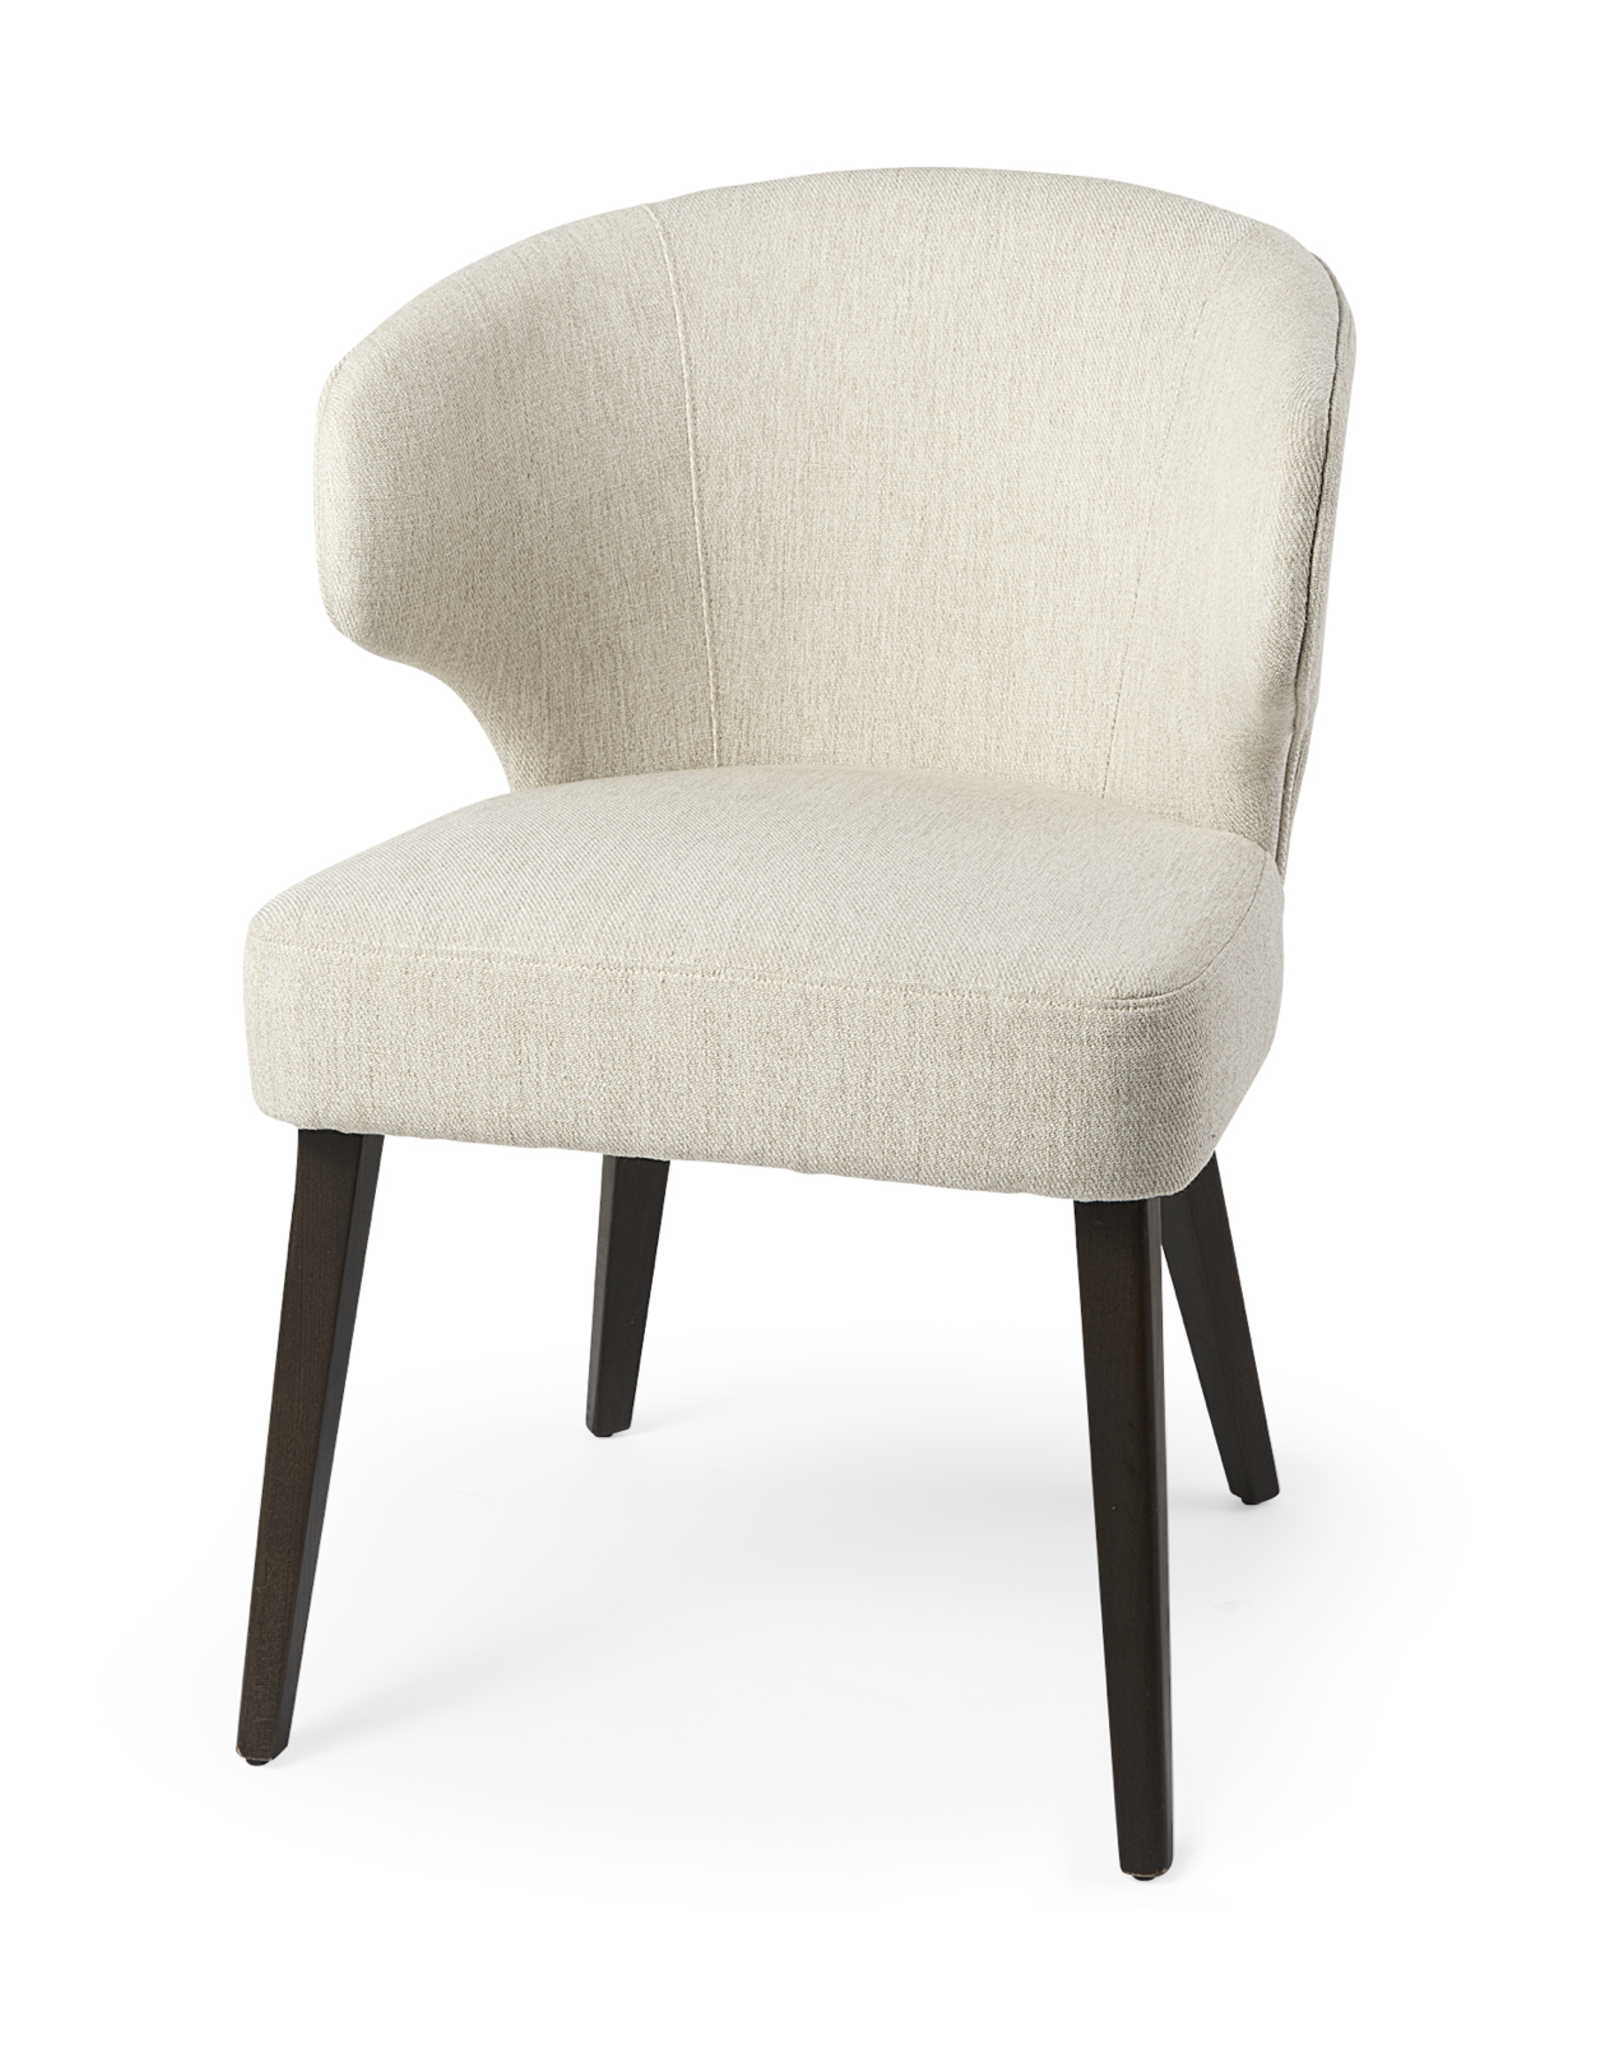 Niles Wingback Dining Chair in Cream